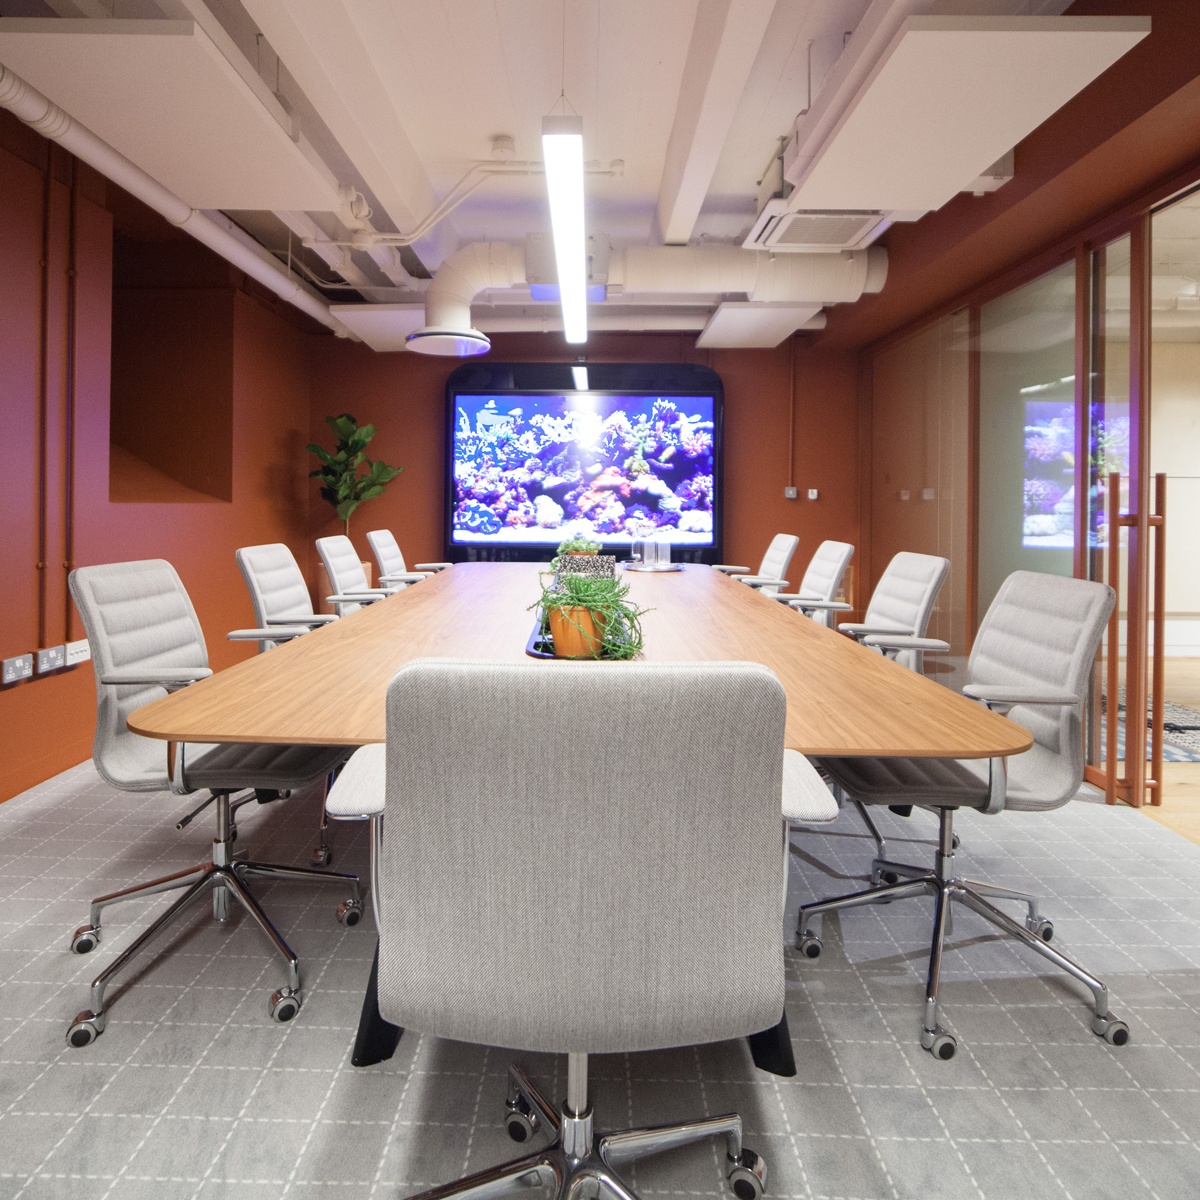 Long meeting table with lots of office chairs